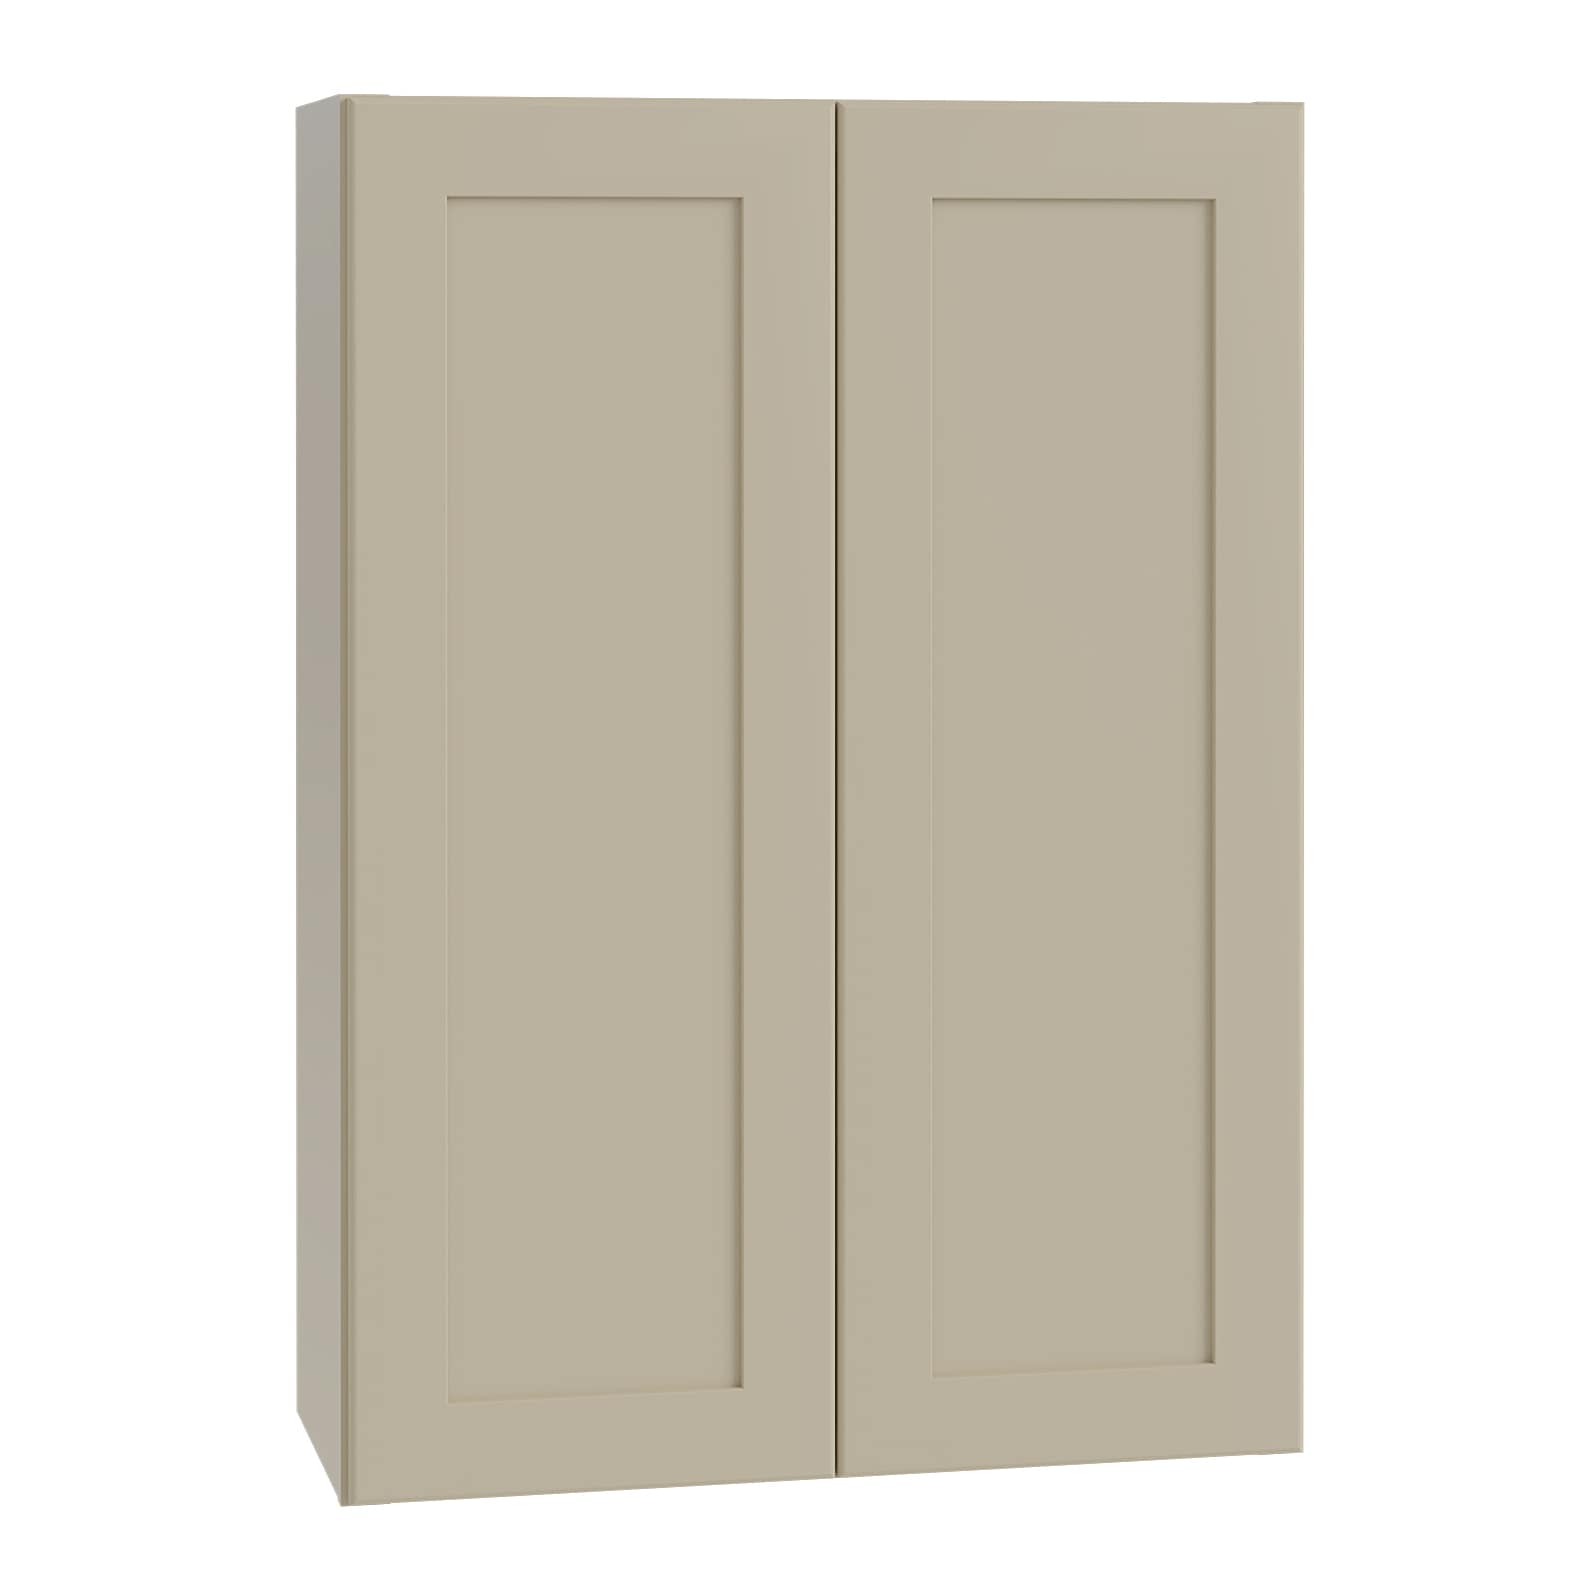 Luxxe Cabinetry 33-in W x 42-in H x 12-in D Norfolk Blended Cream Painted Door Wall Fully Assembled Semi-custom Cabinet in Off-White | W3342-NBC